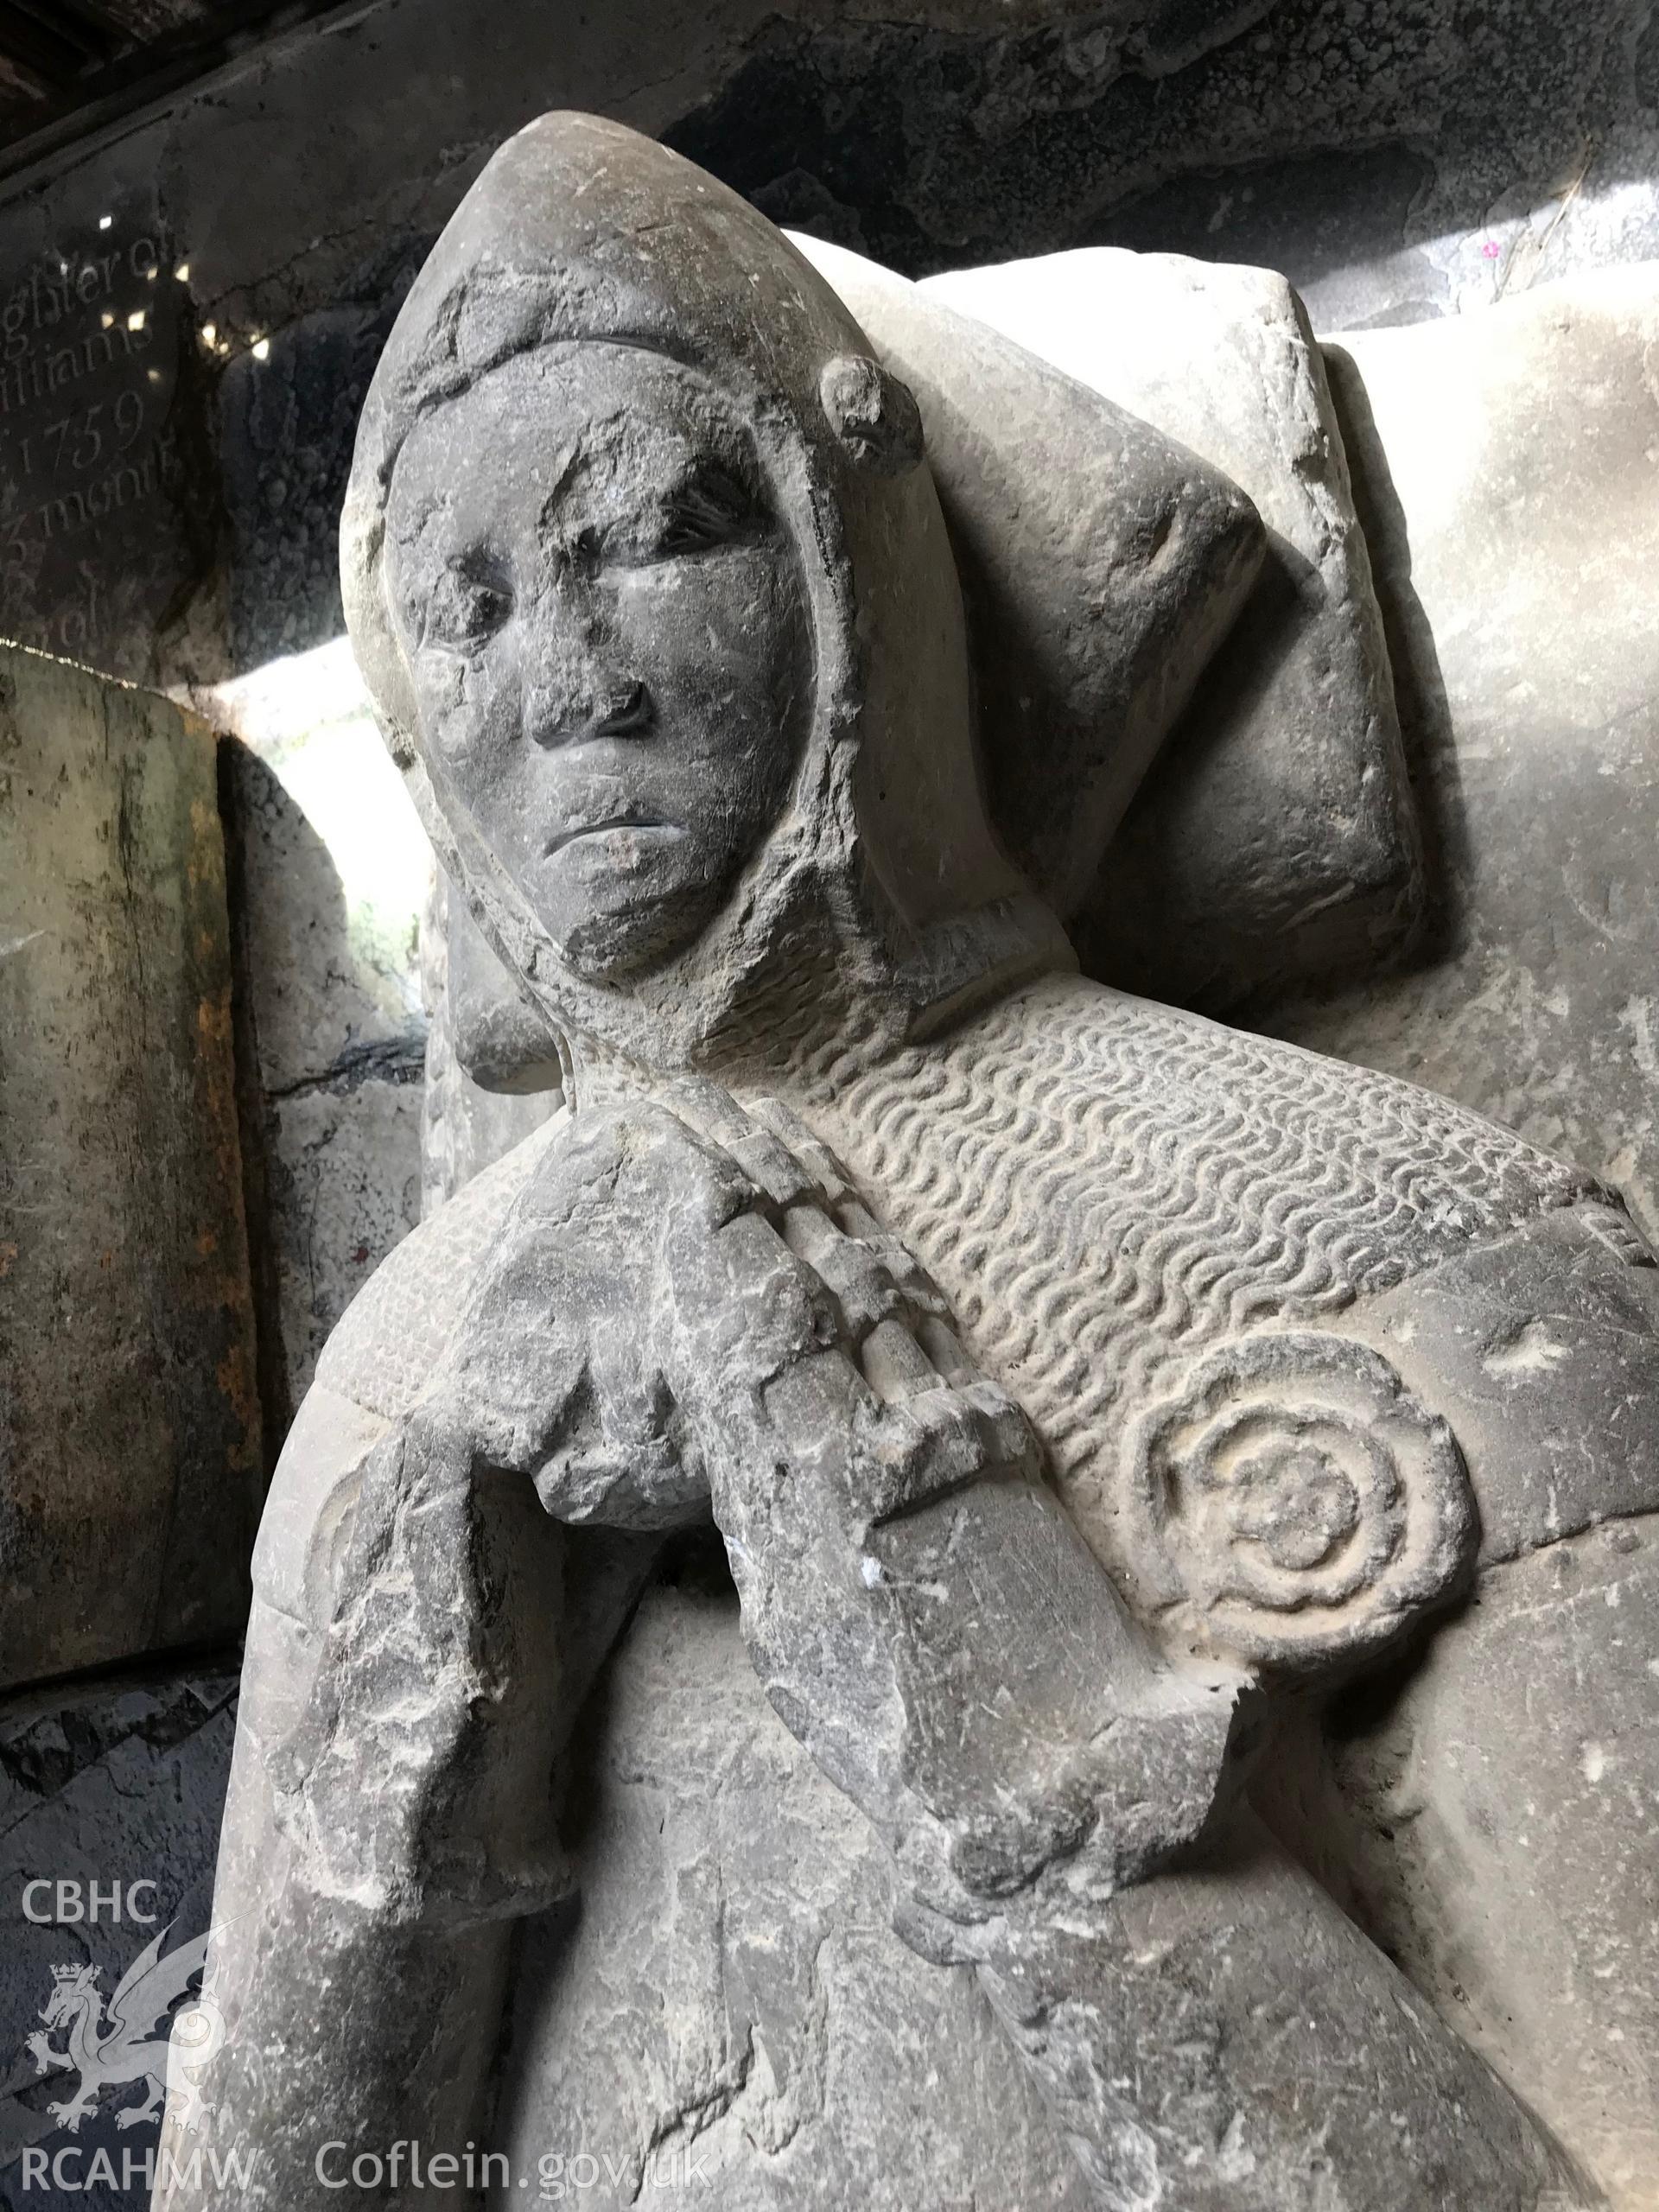 Colour photo showing detail of carved stone figure at St. Grwst's Church, Llanrwst, taken by Paul R. Davis, 23rd June 2018.